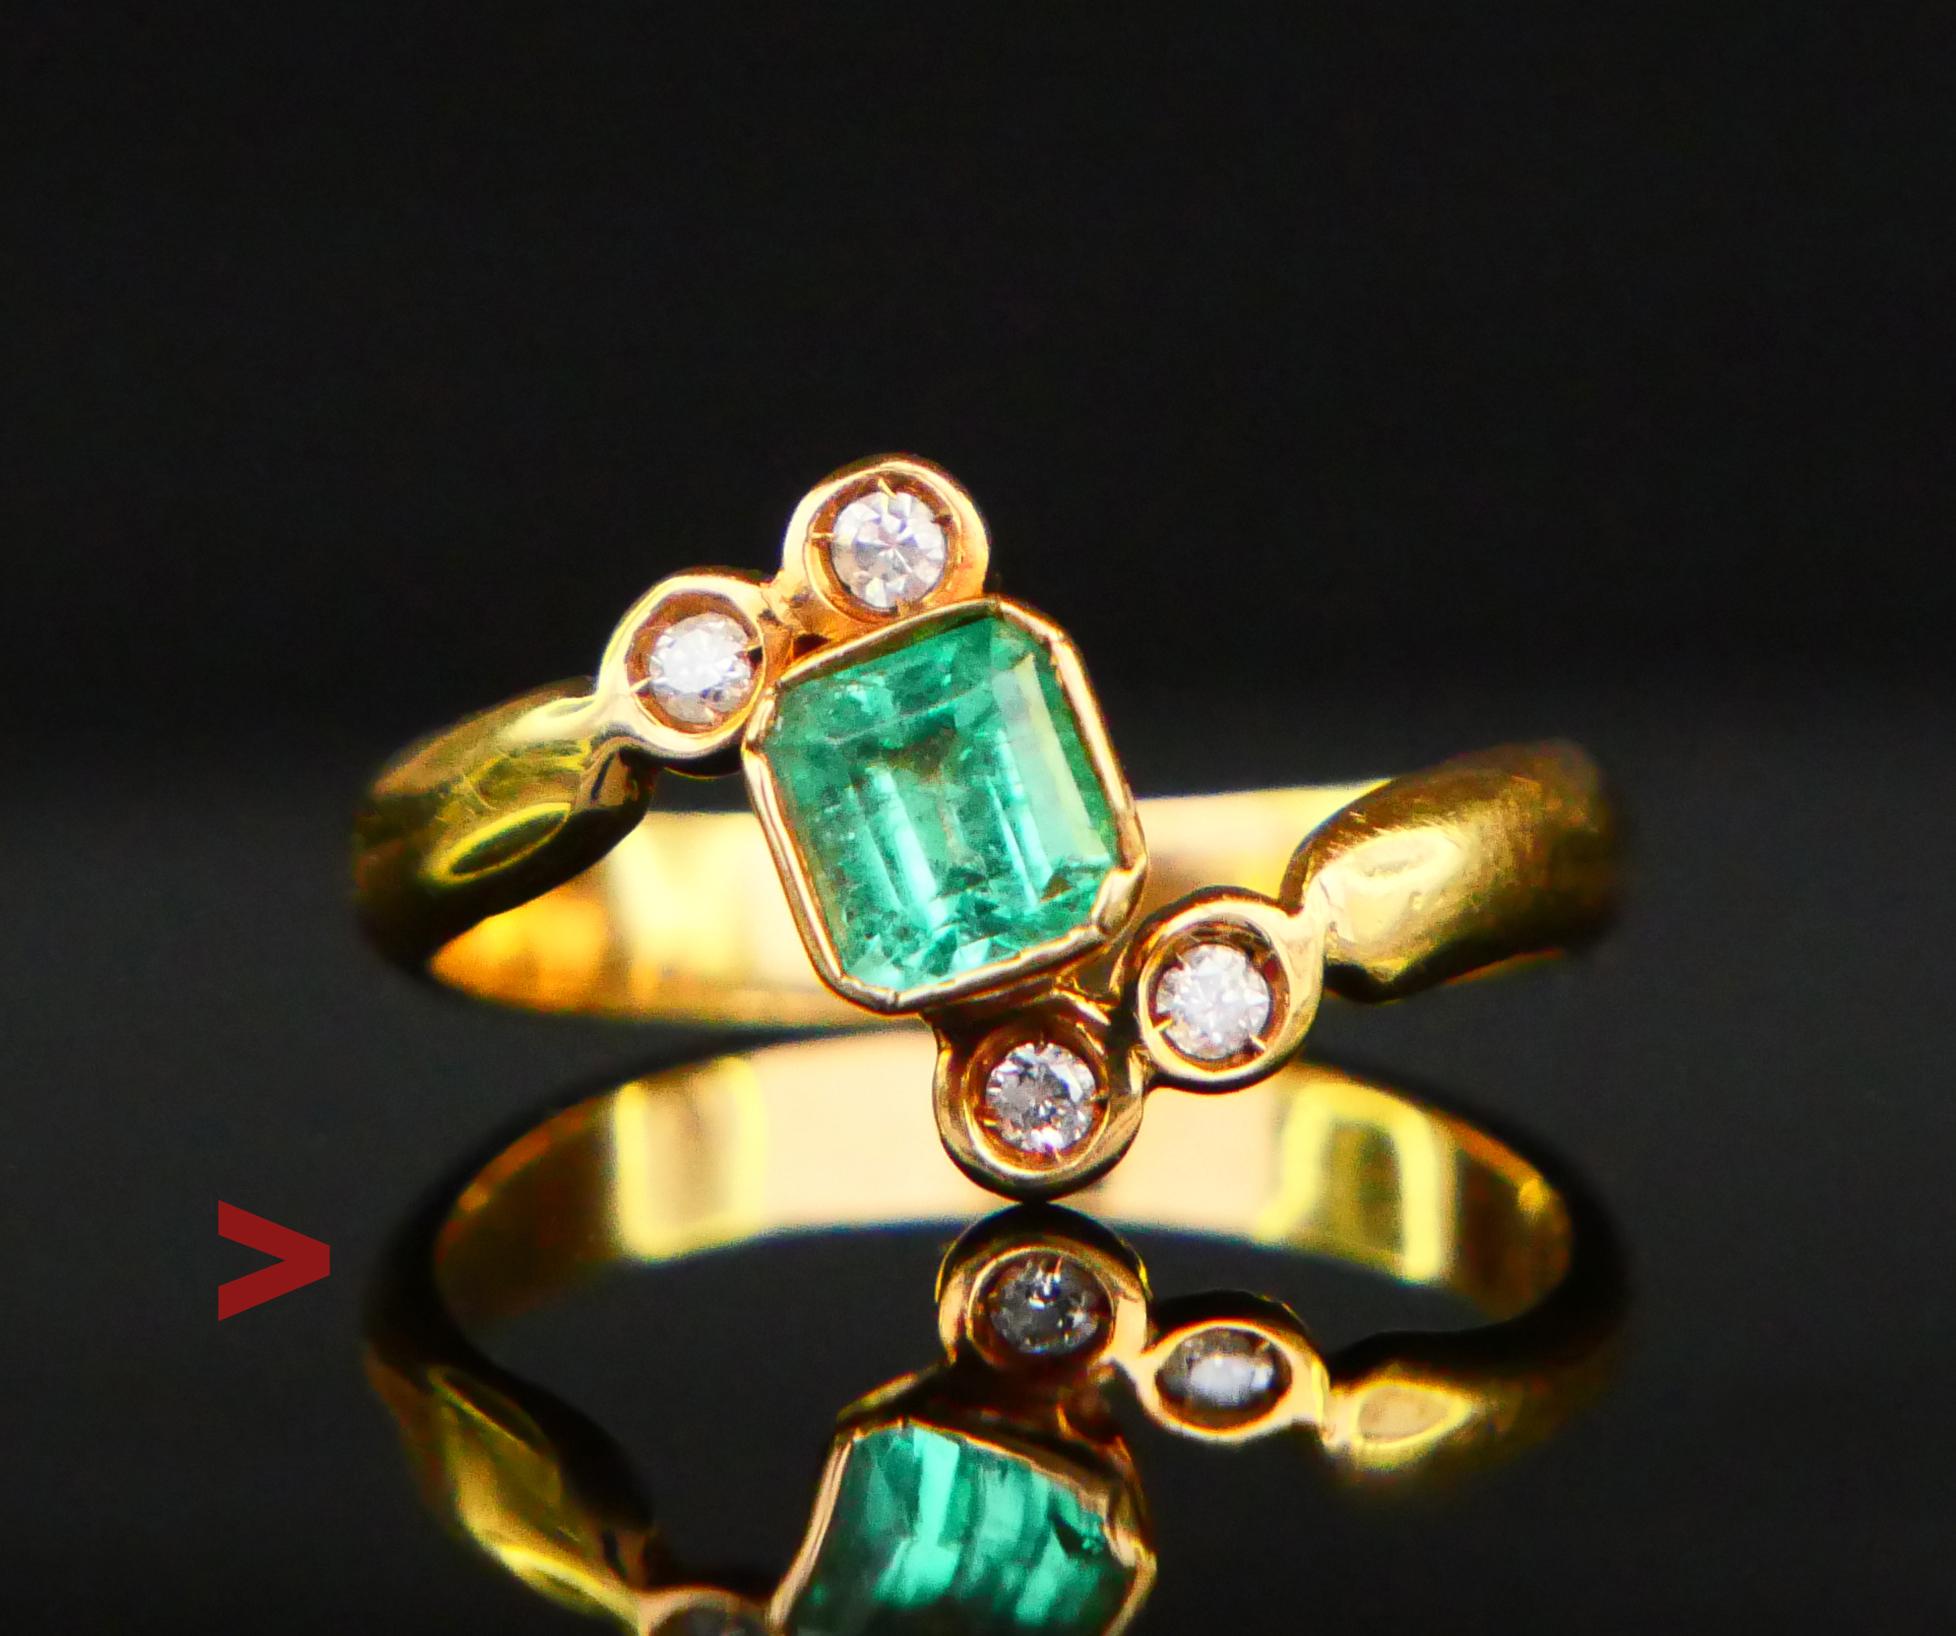 Elegant Emerald and Diamonds European Ring with curved band in solid 18ct Yellow Gold + bezel set natural emerald cut Emerald stone 5 mm x 4.55 mm x 3.15 mm deep / ca. 0.6 ct of deep/strong Green color accented with four old European cut natural